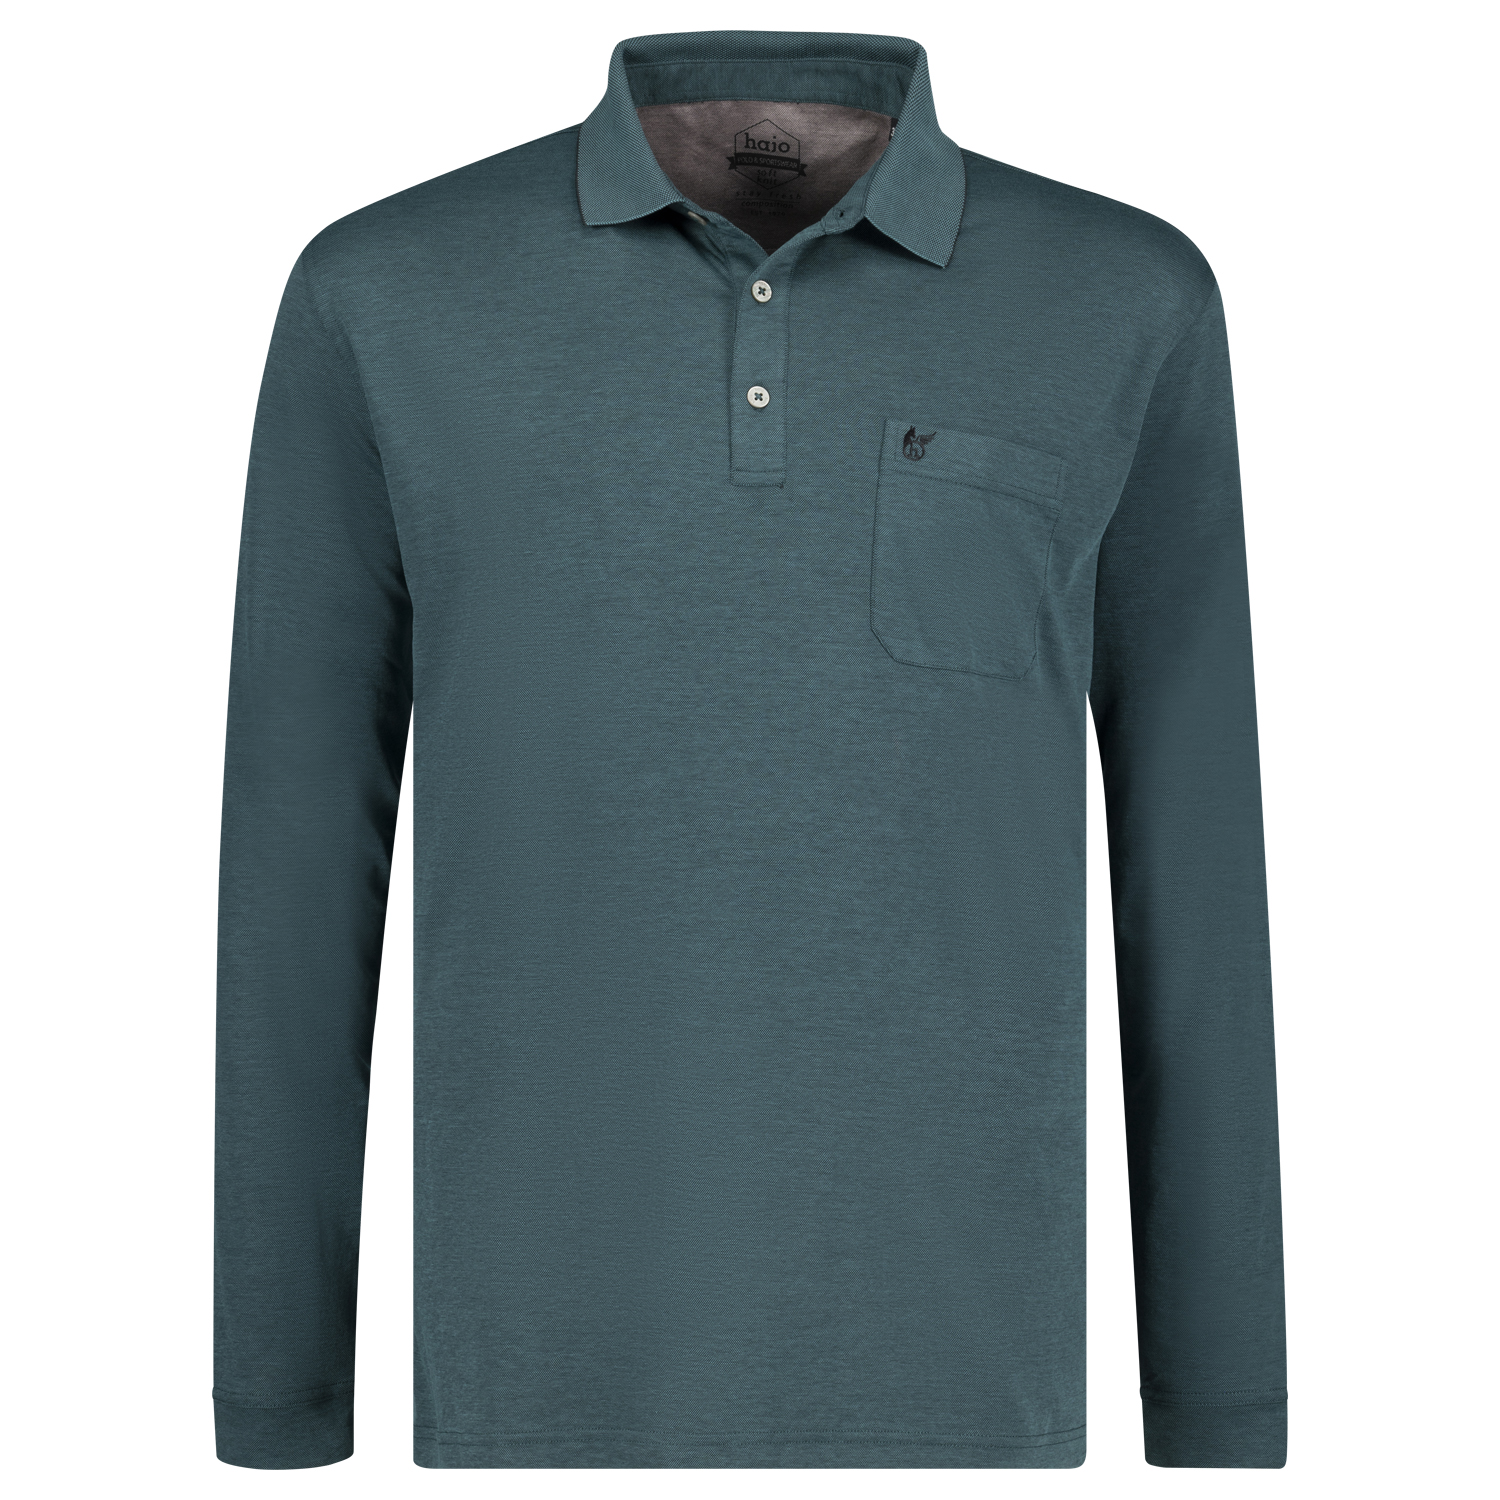 Long sleeve polo shirt "stay fresh" by hajo in bluegreen up to oversize 6XL- soft knit